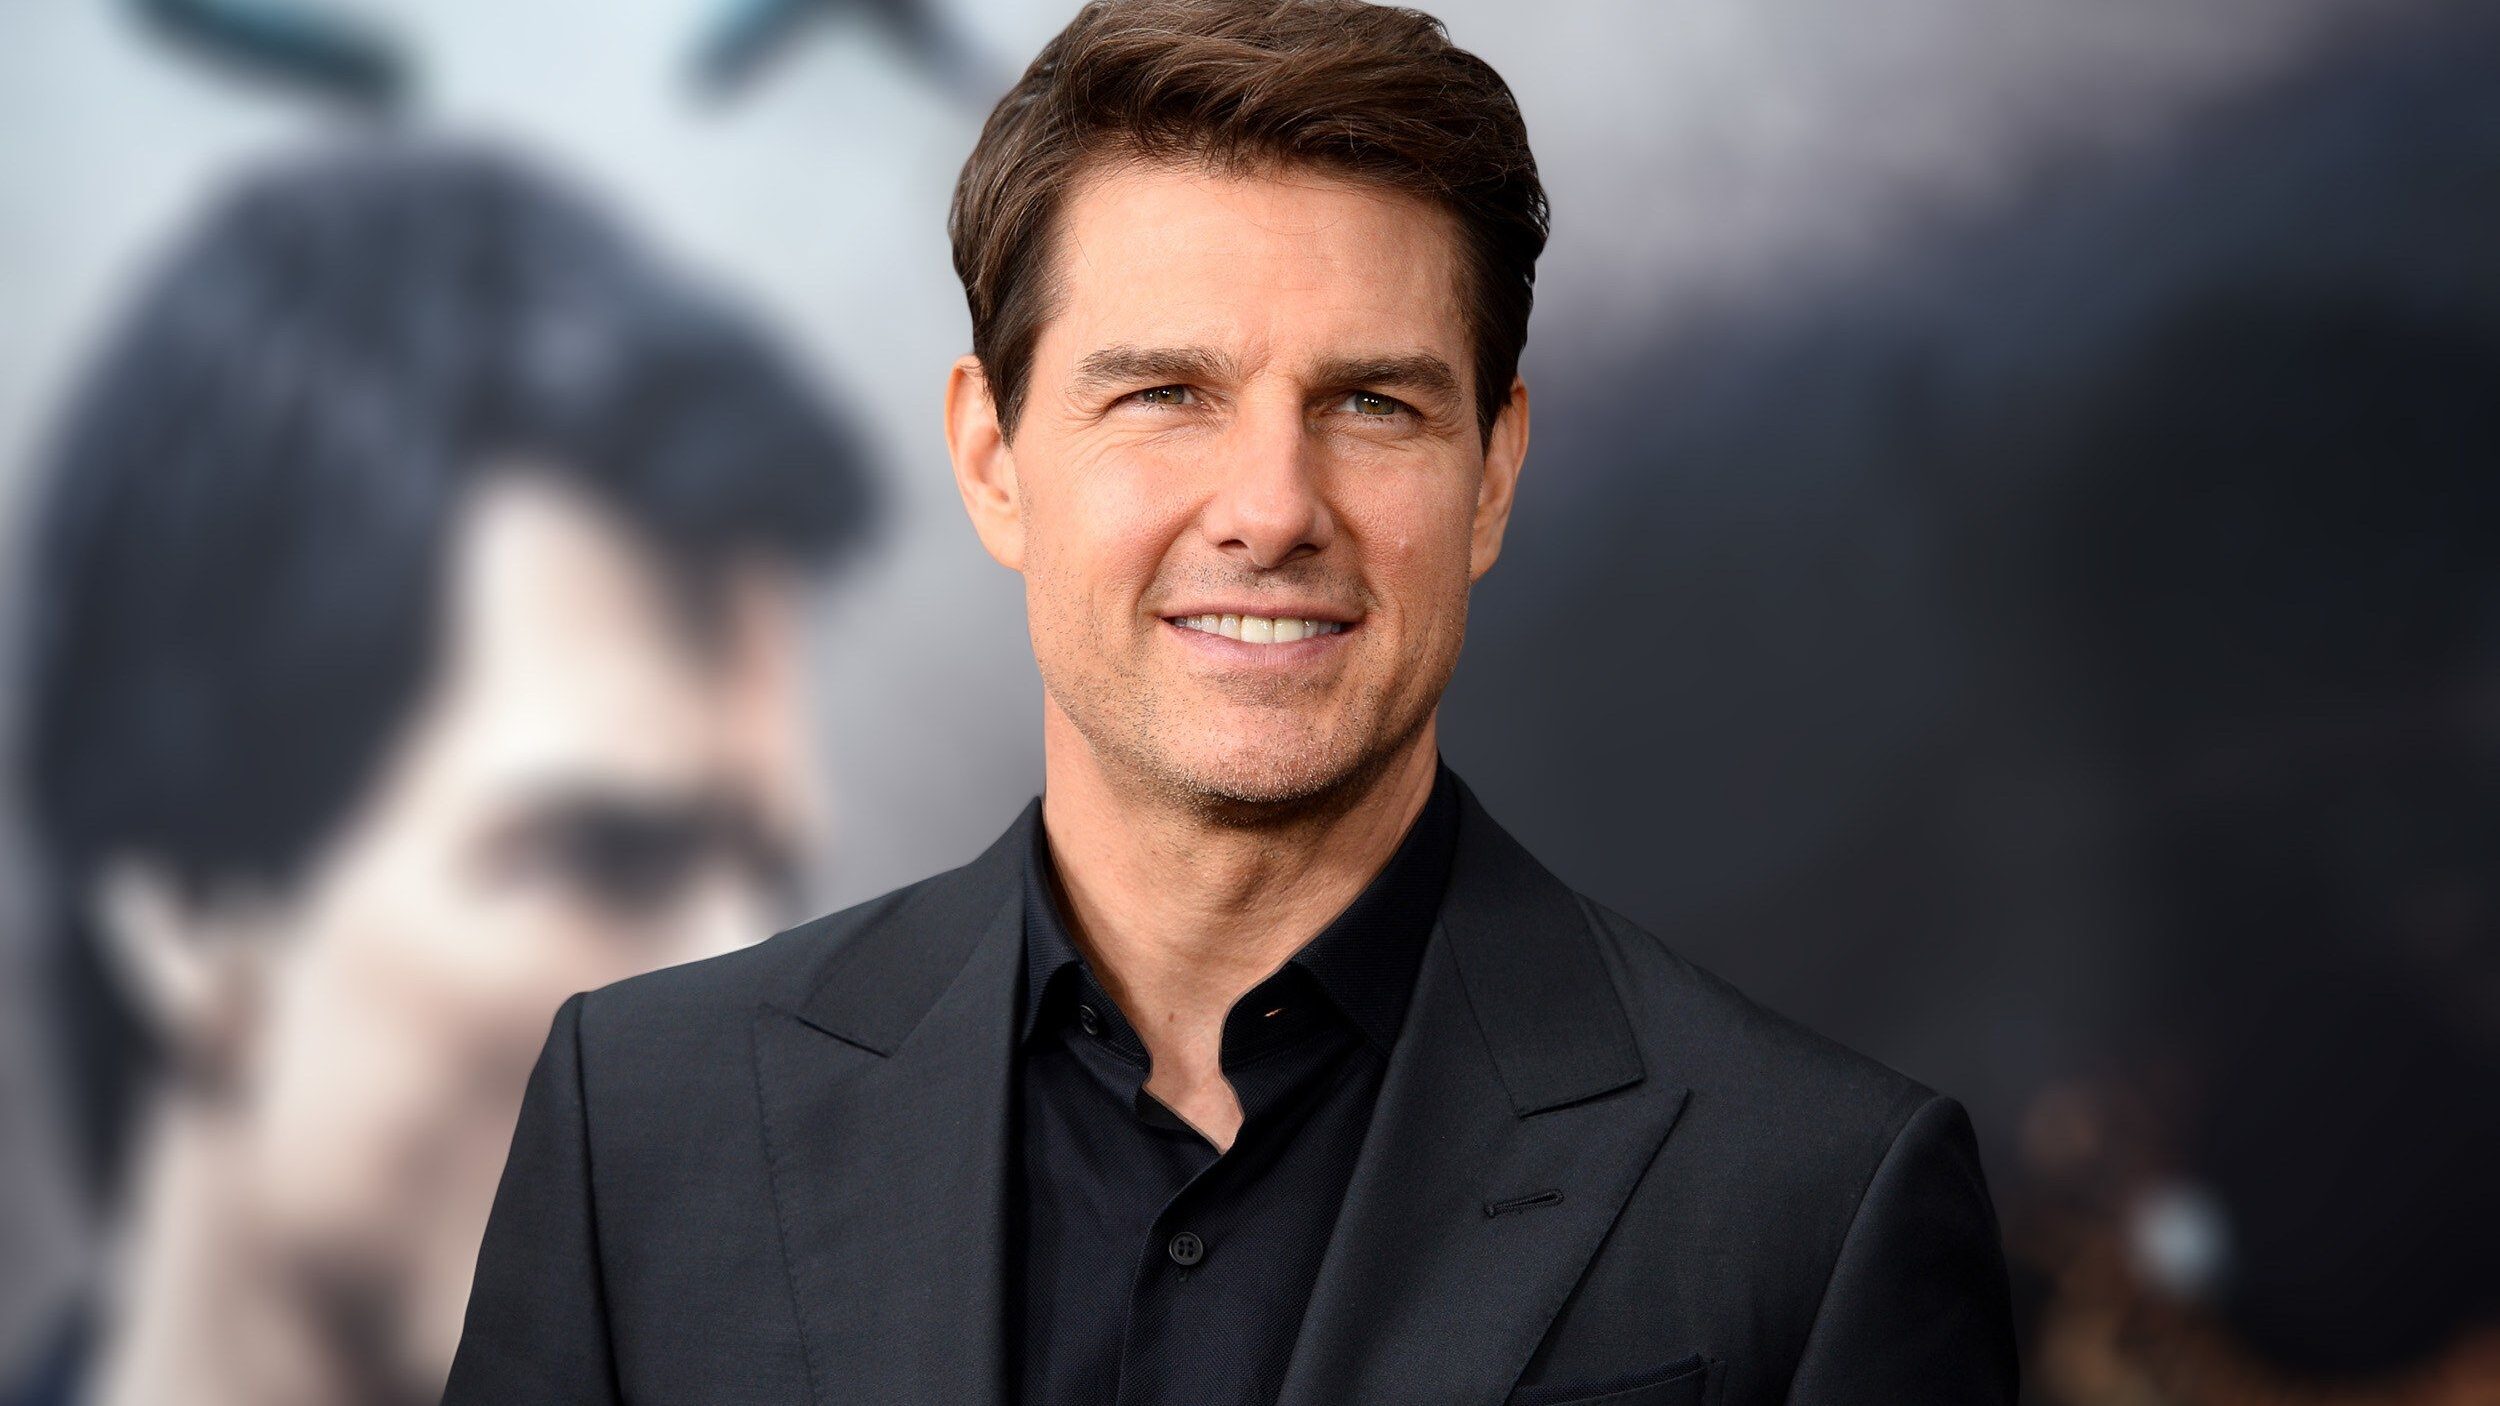 Tom Cruise net worth is $600 million and he is the third richest actors in Hollywood.